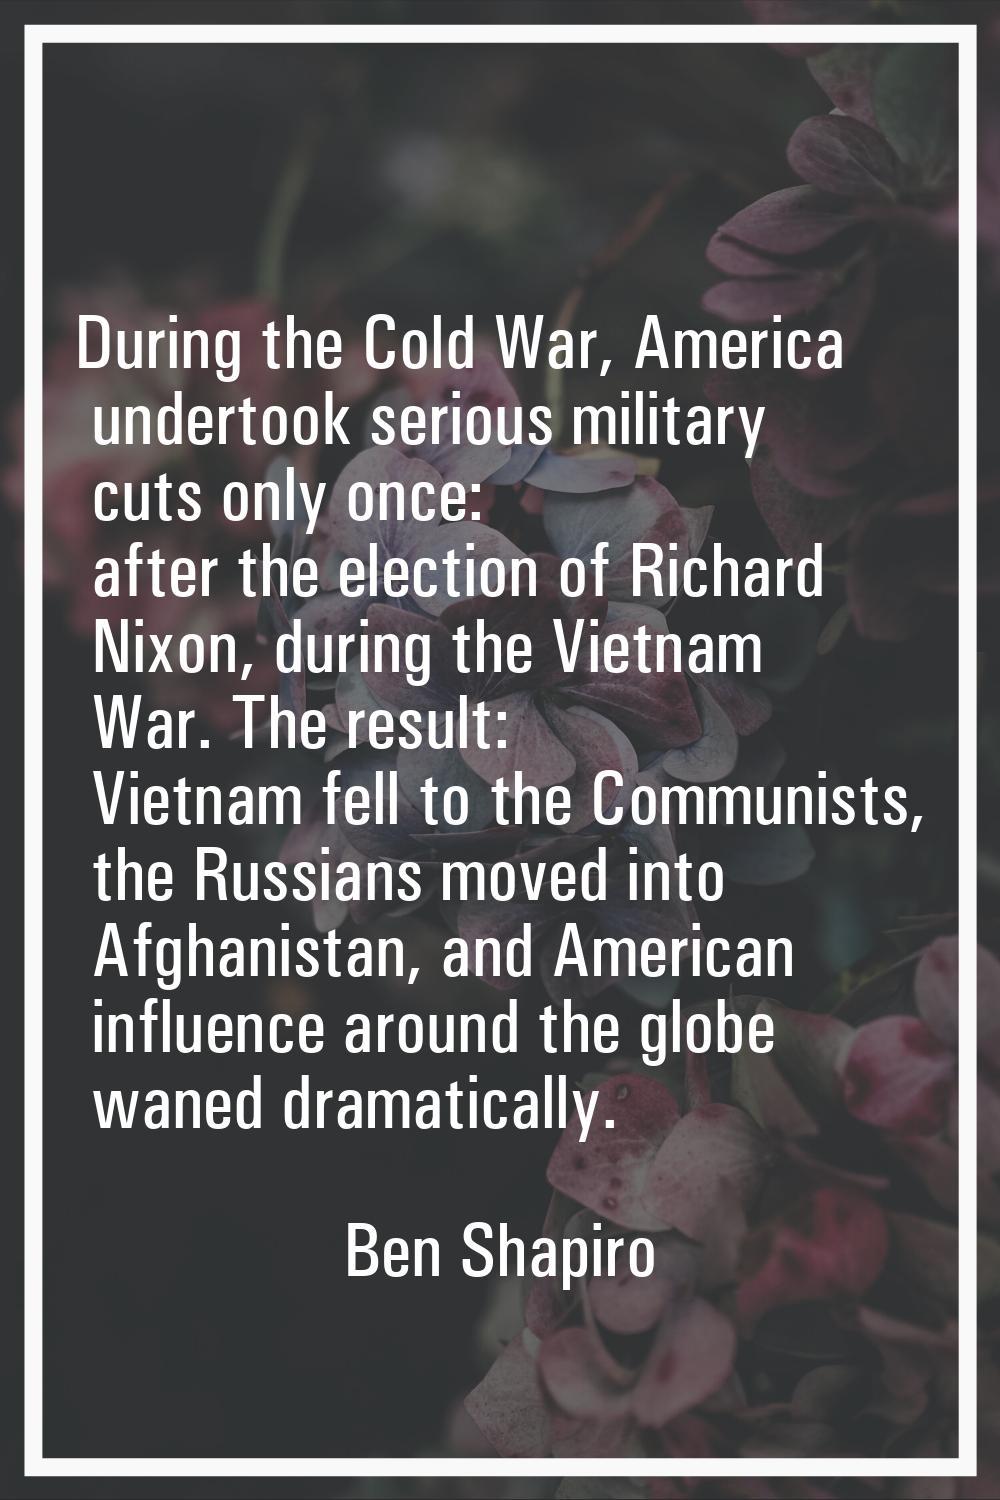 During the Cold War, America undertook serious military cuts only once: after the election of Richa